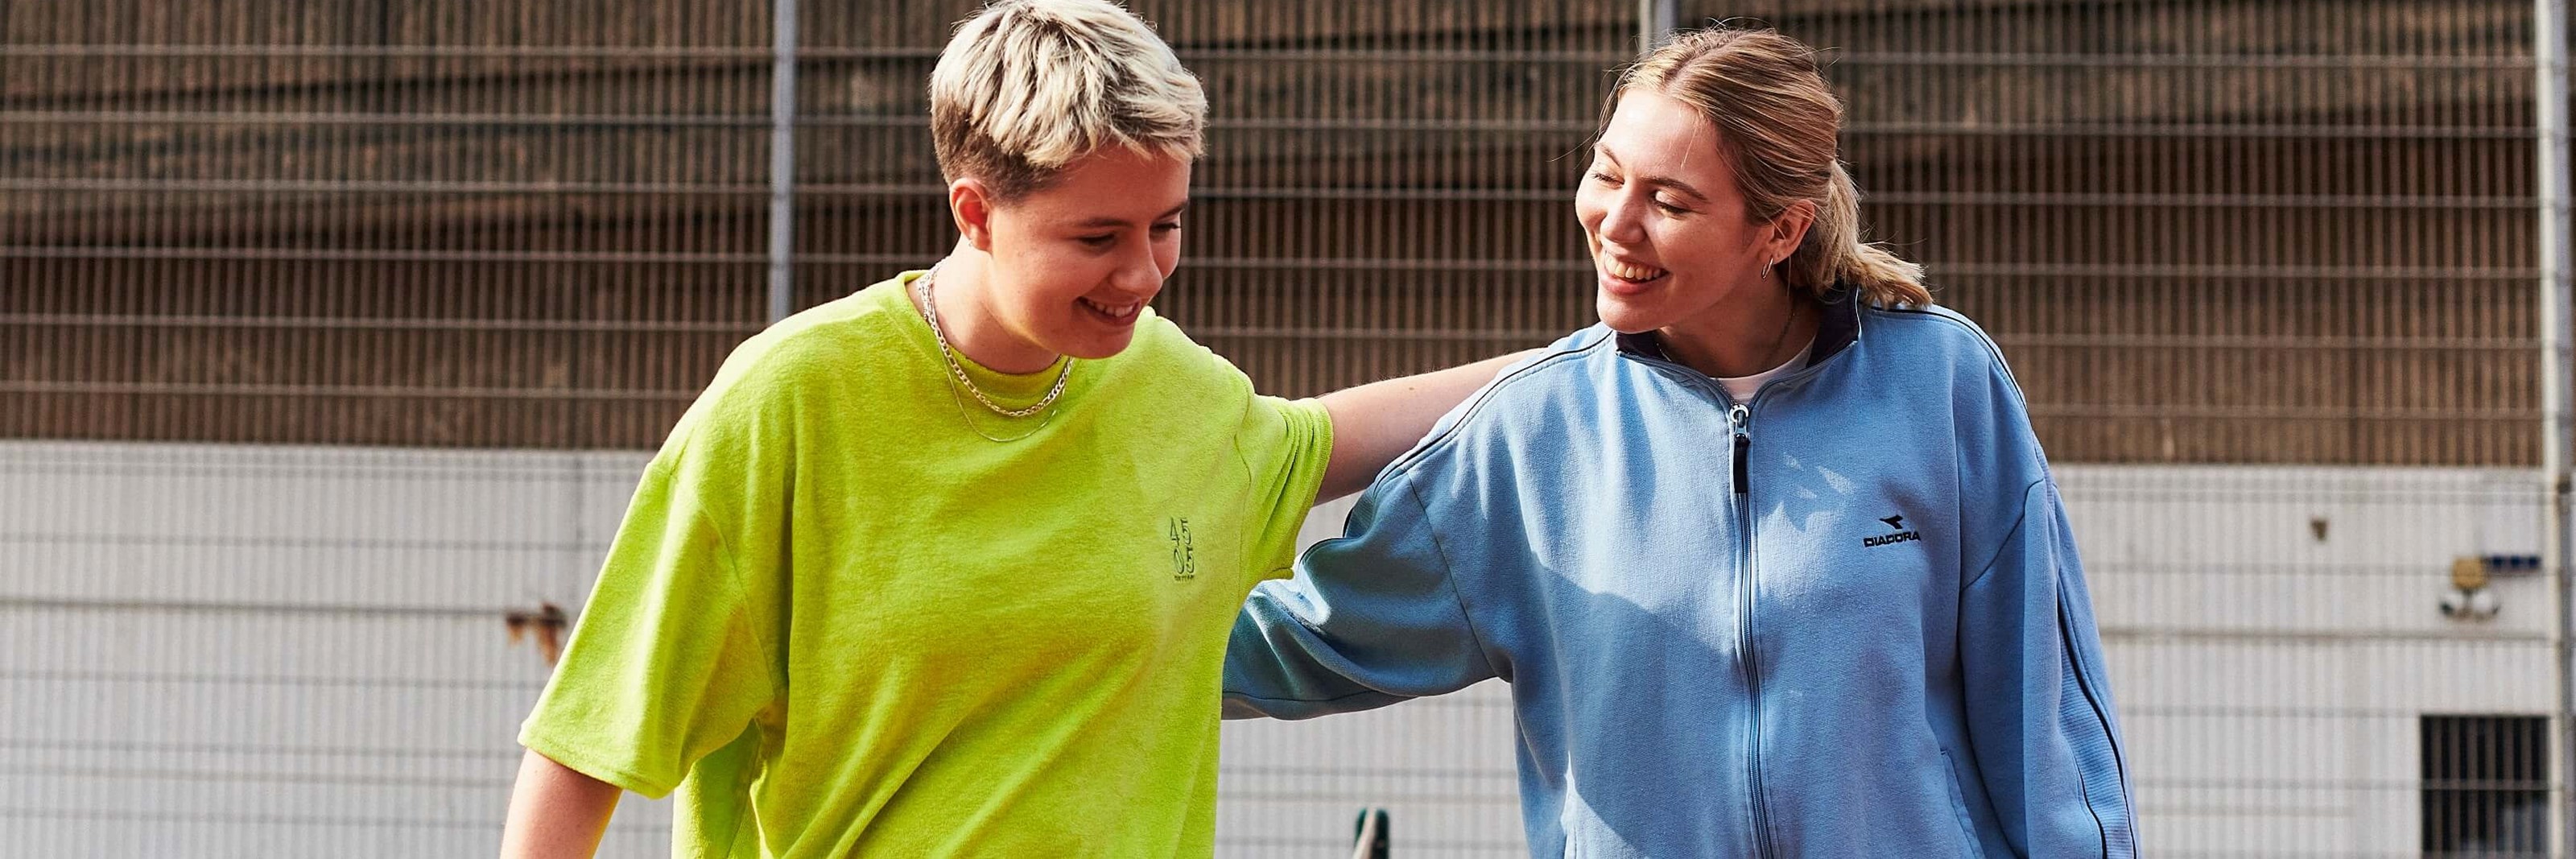 Two women patting each other on the back after a game of tennis